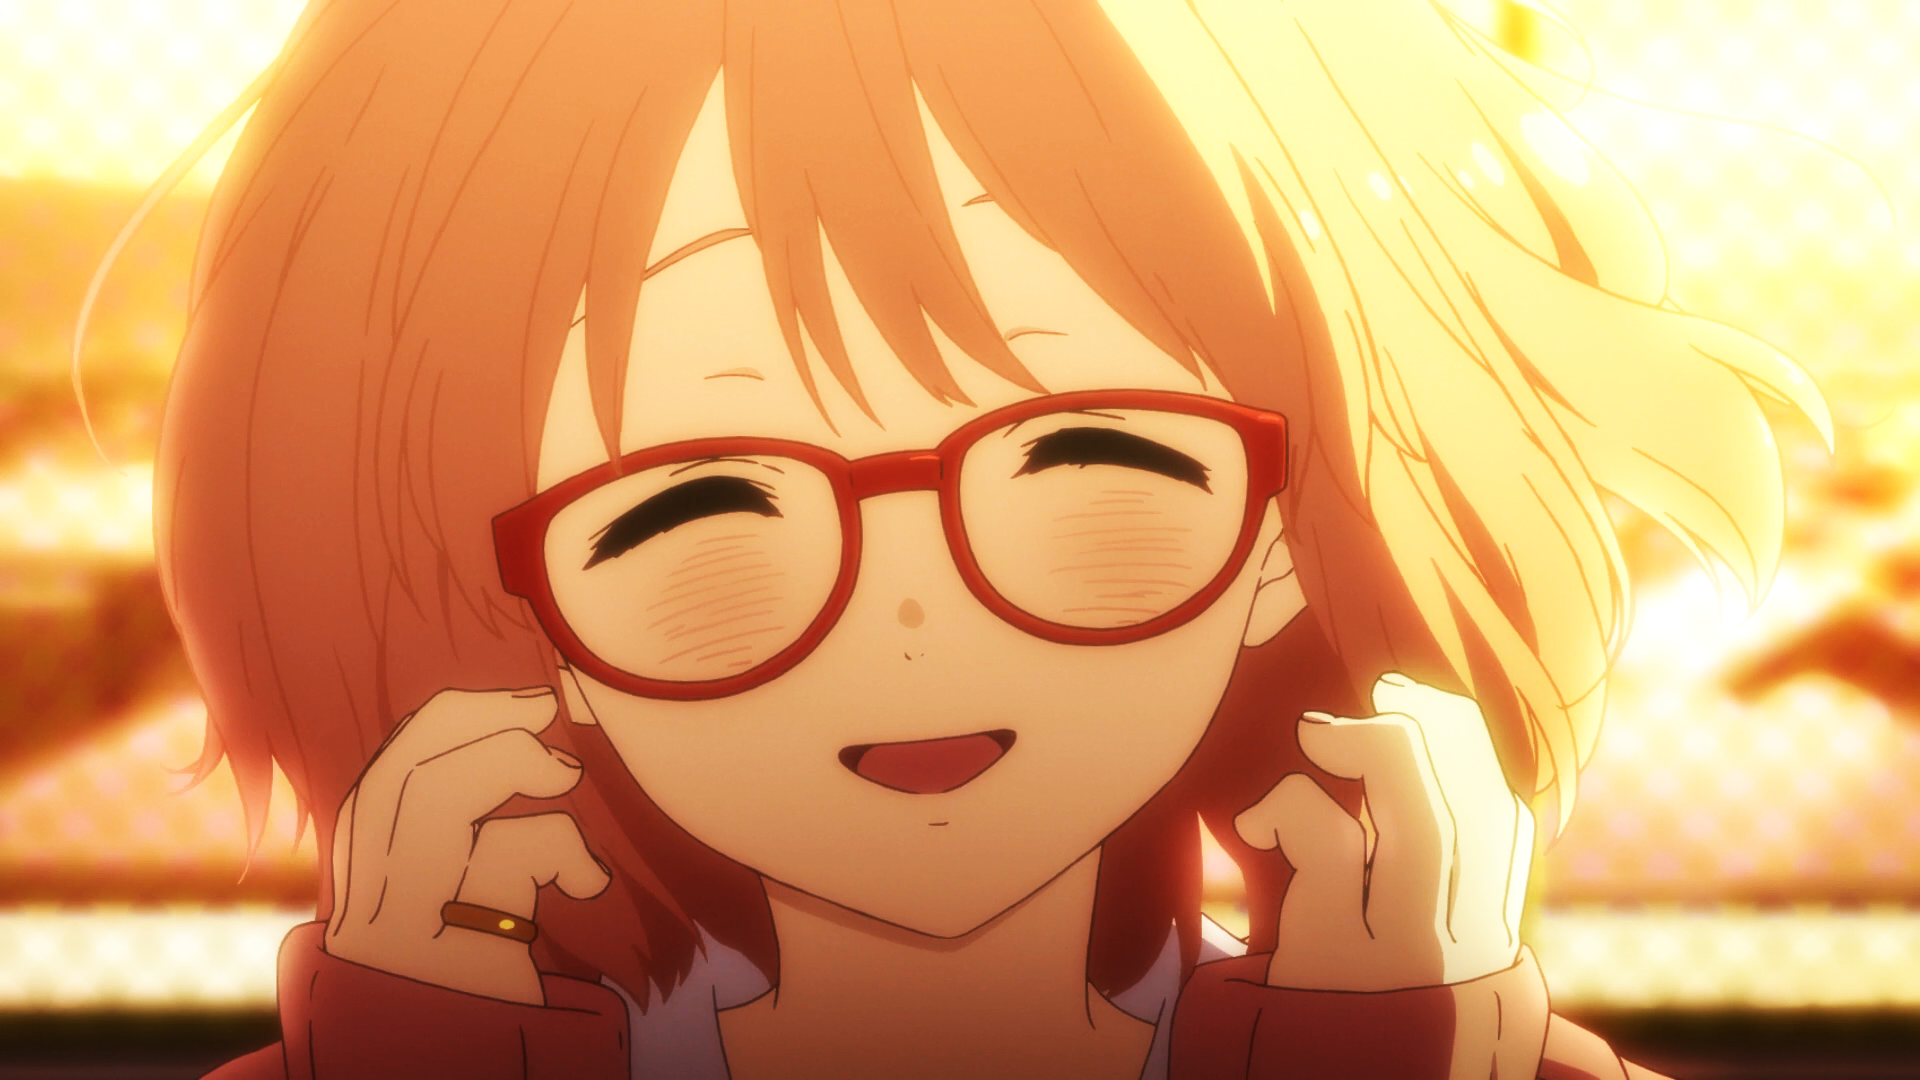 Beyond the Boundary HD Wallpaper. Background Imagex1080